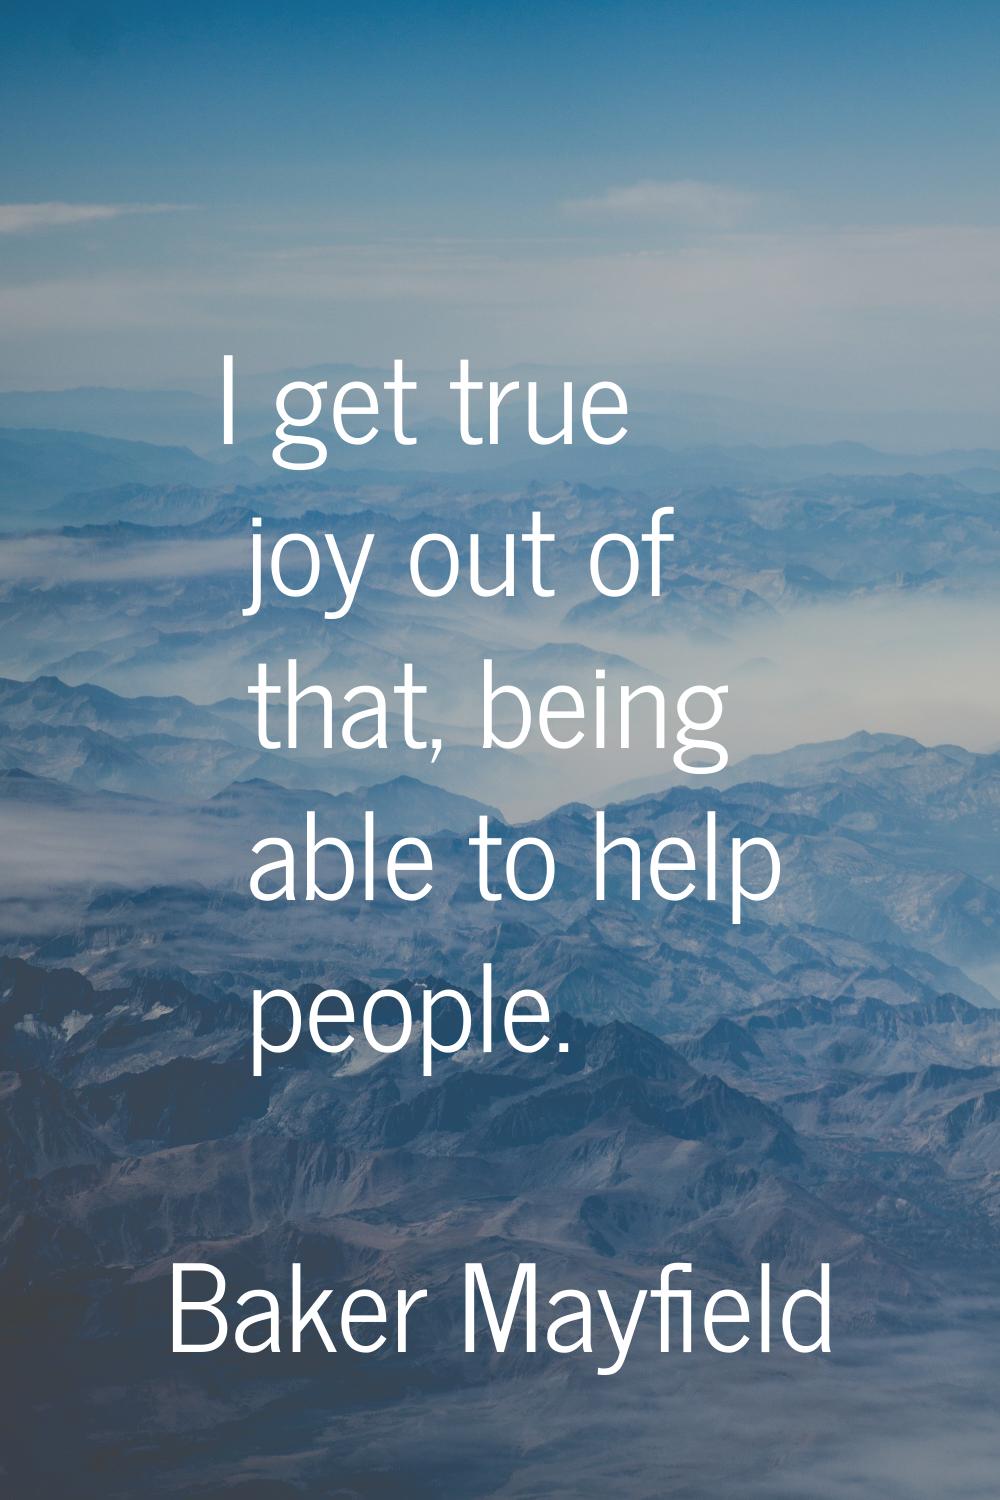 I get true joy out of that, being able to help people.